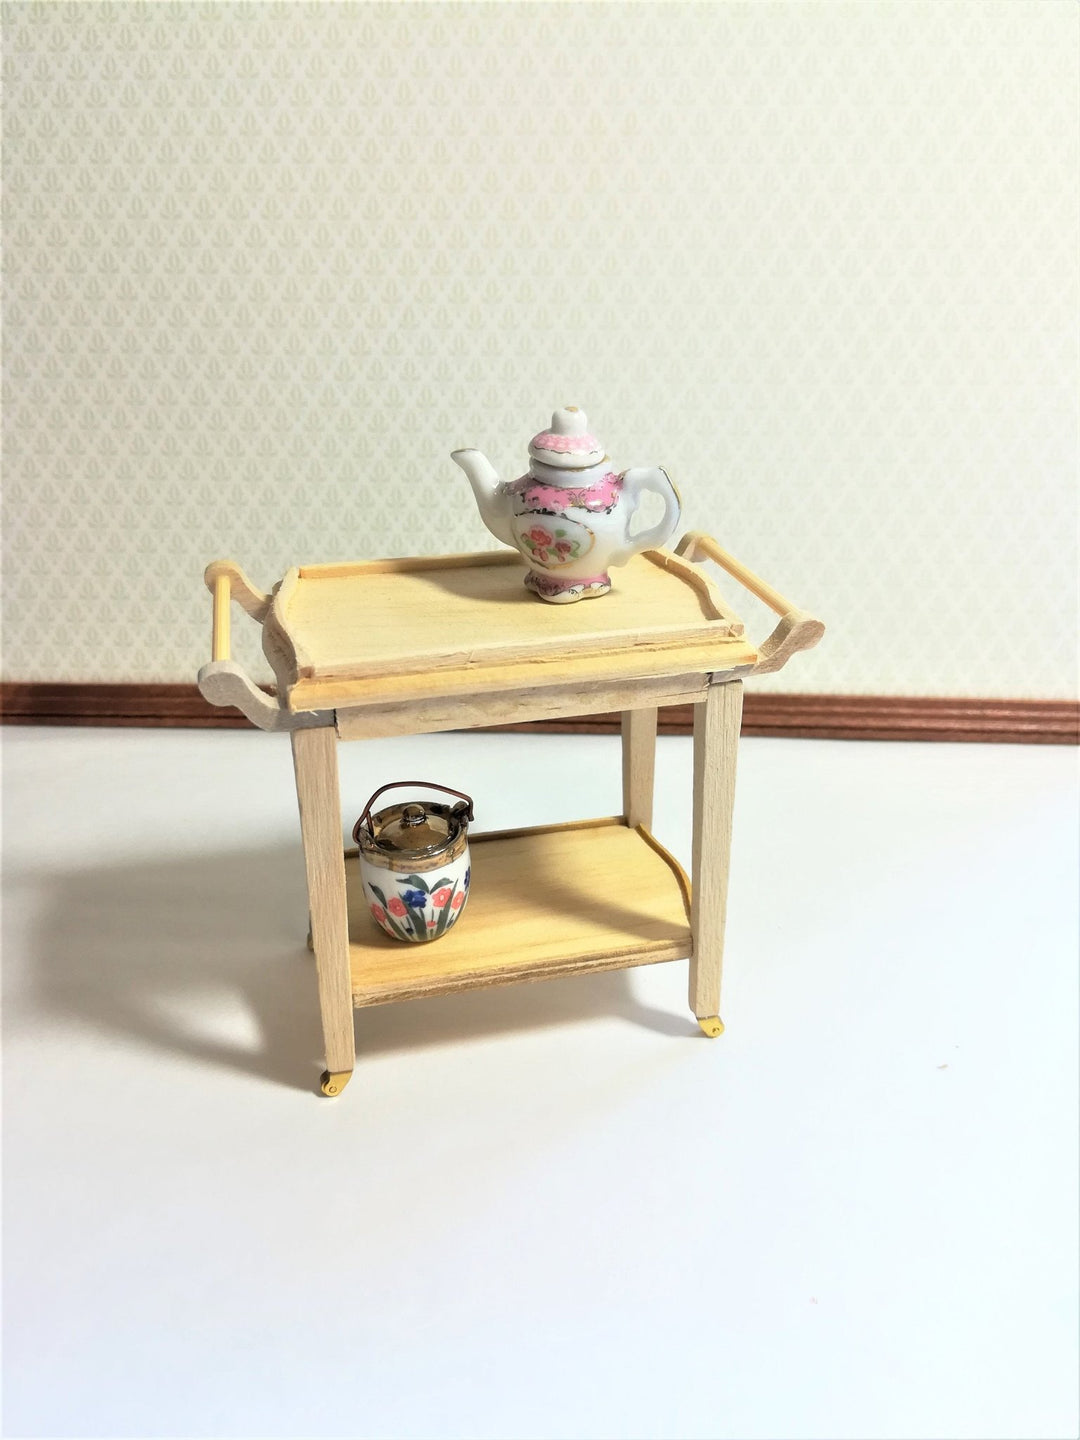 Dollhouse Miniature Ceramic Fancy Pink & White Teapot with Removable Lid 1:12 Scale - Miniature Crush